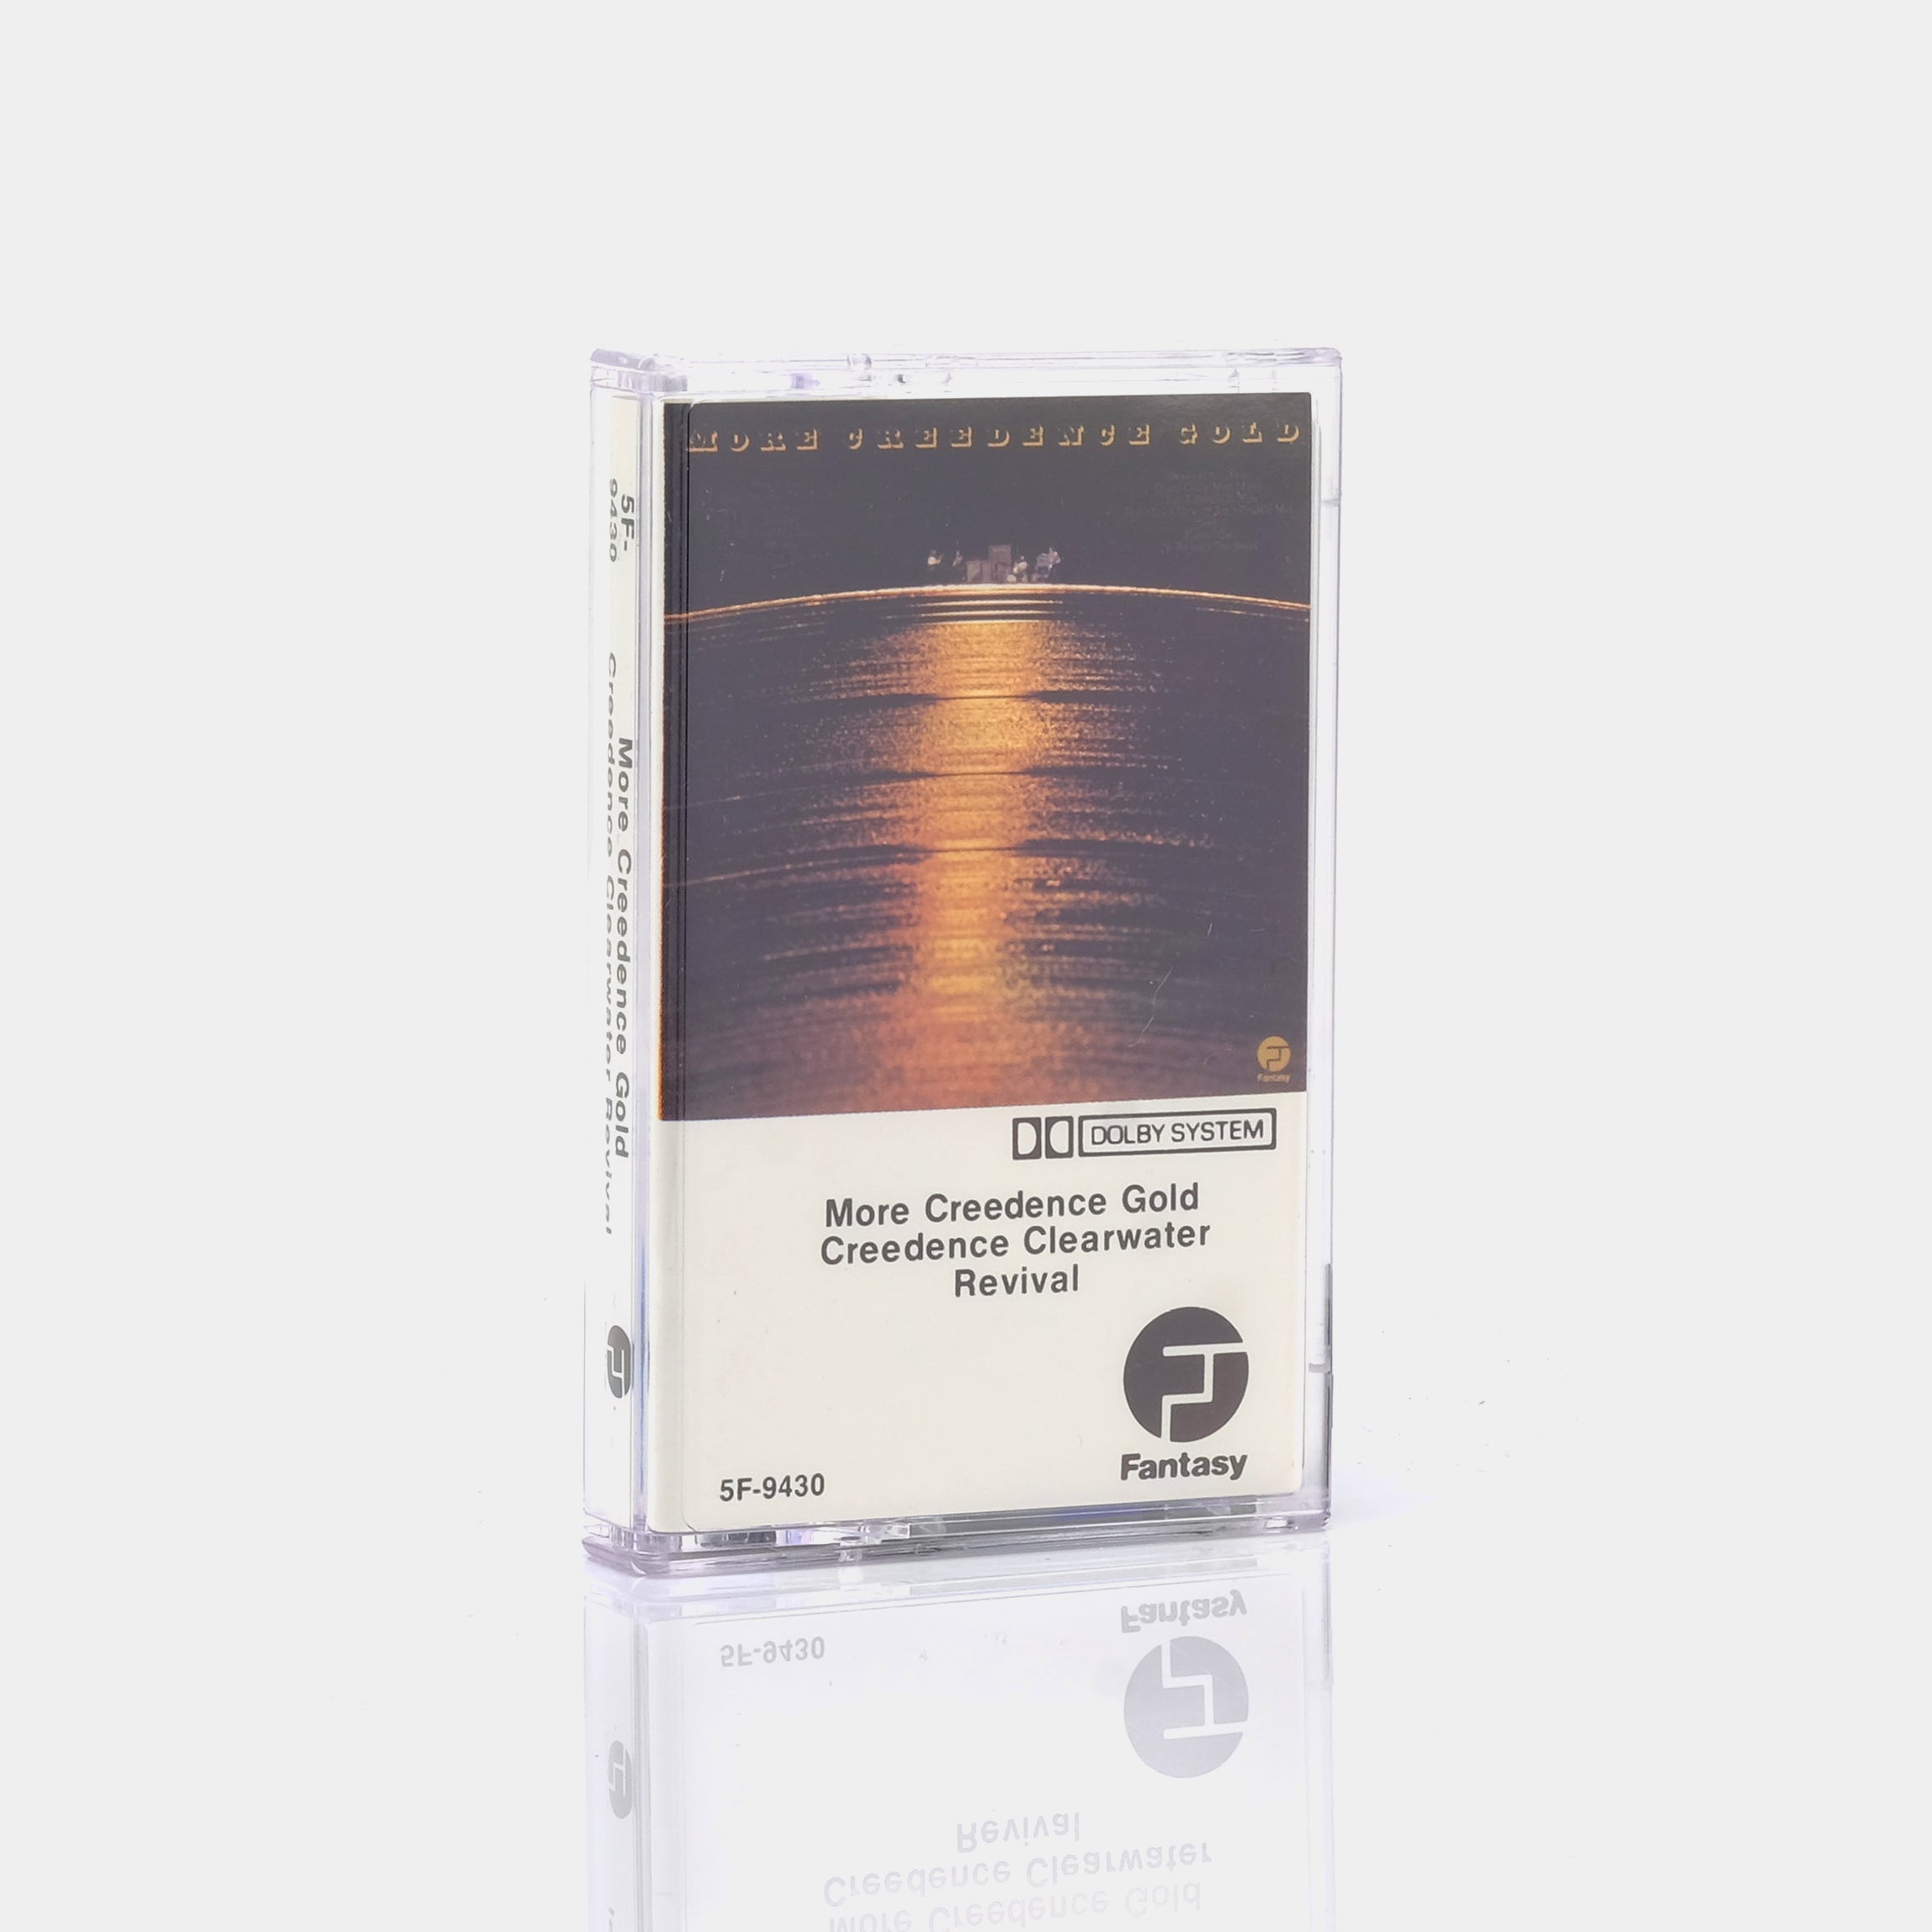 Creedence Clearwater Revival - More Creedence Gold Cassette Tape